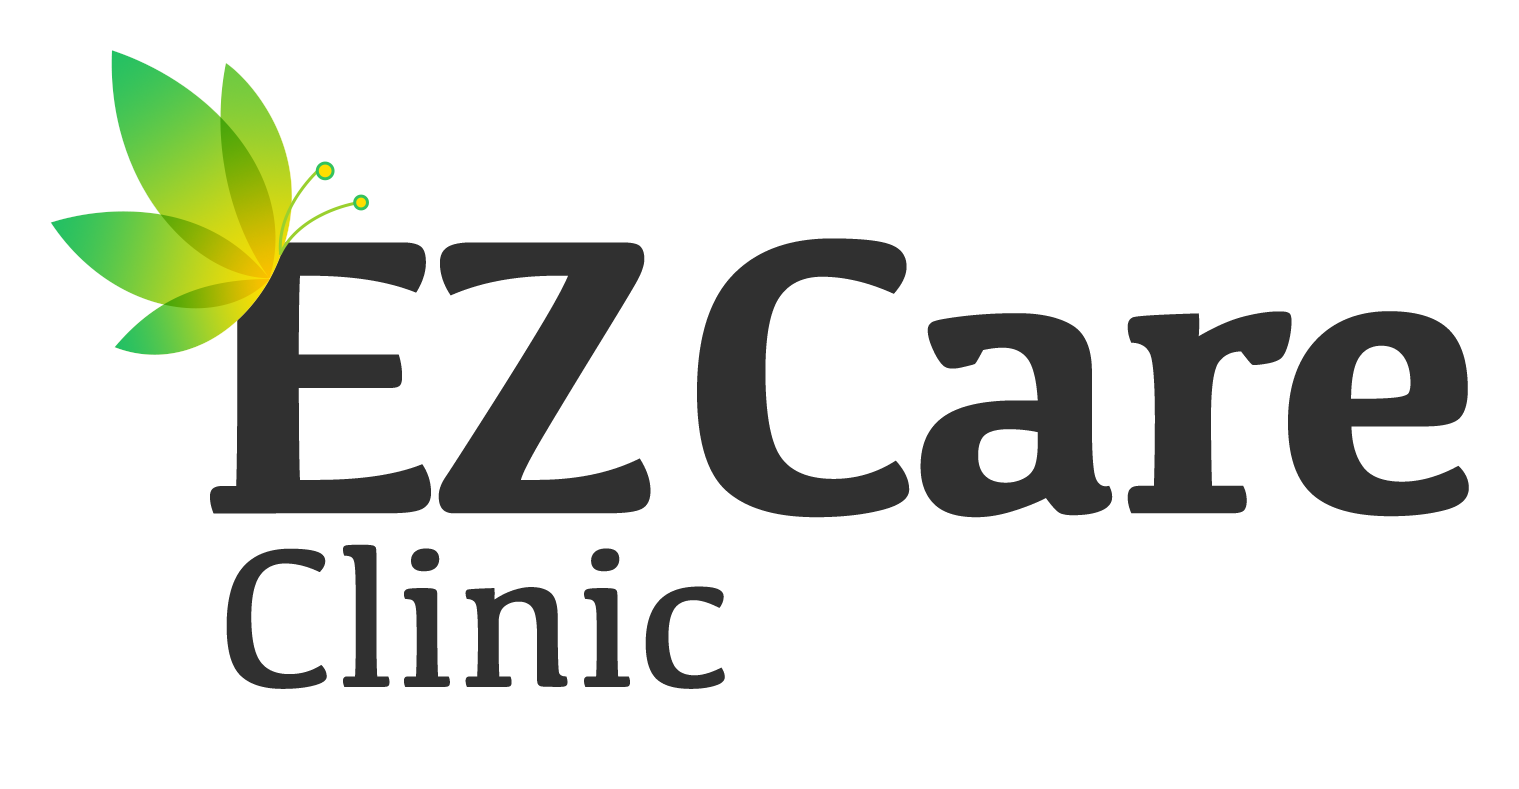 EzCare Medical Clinic